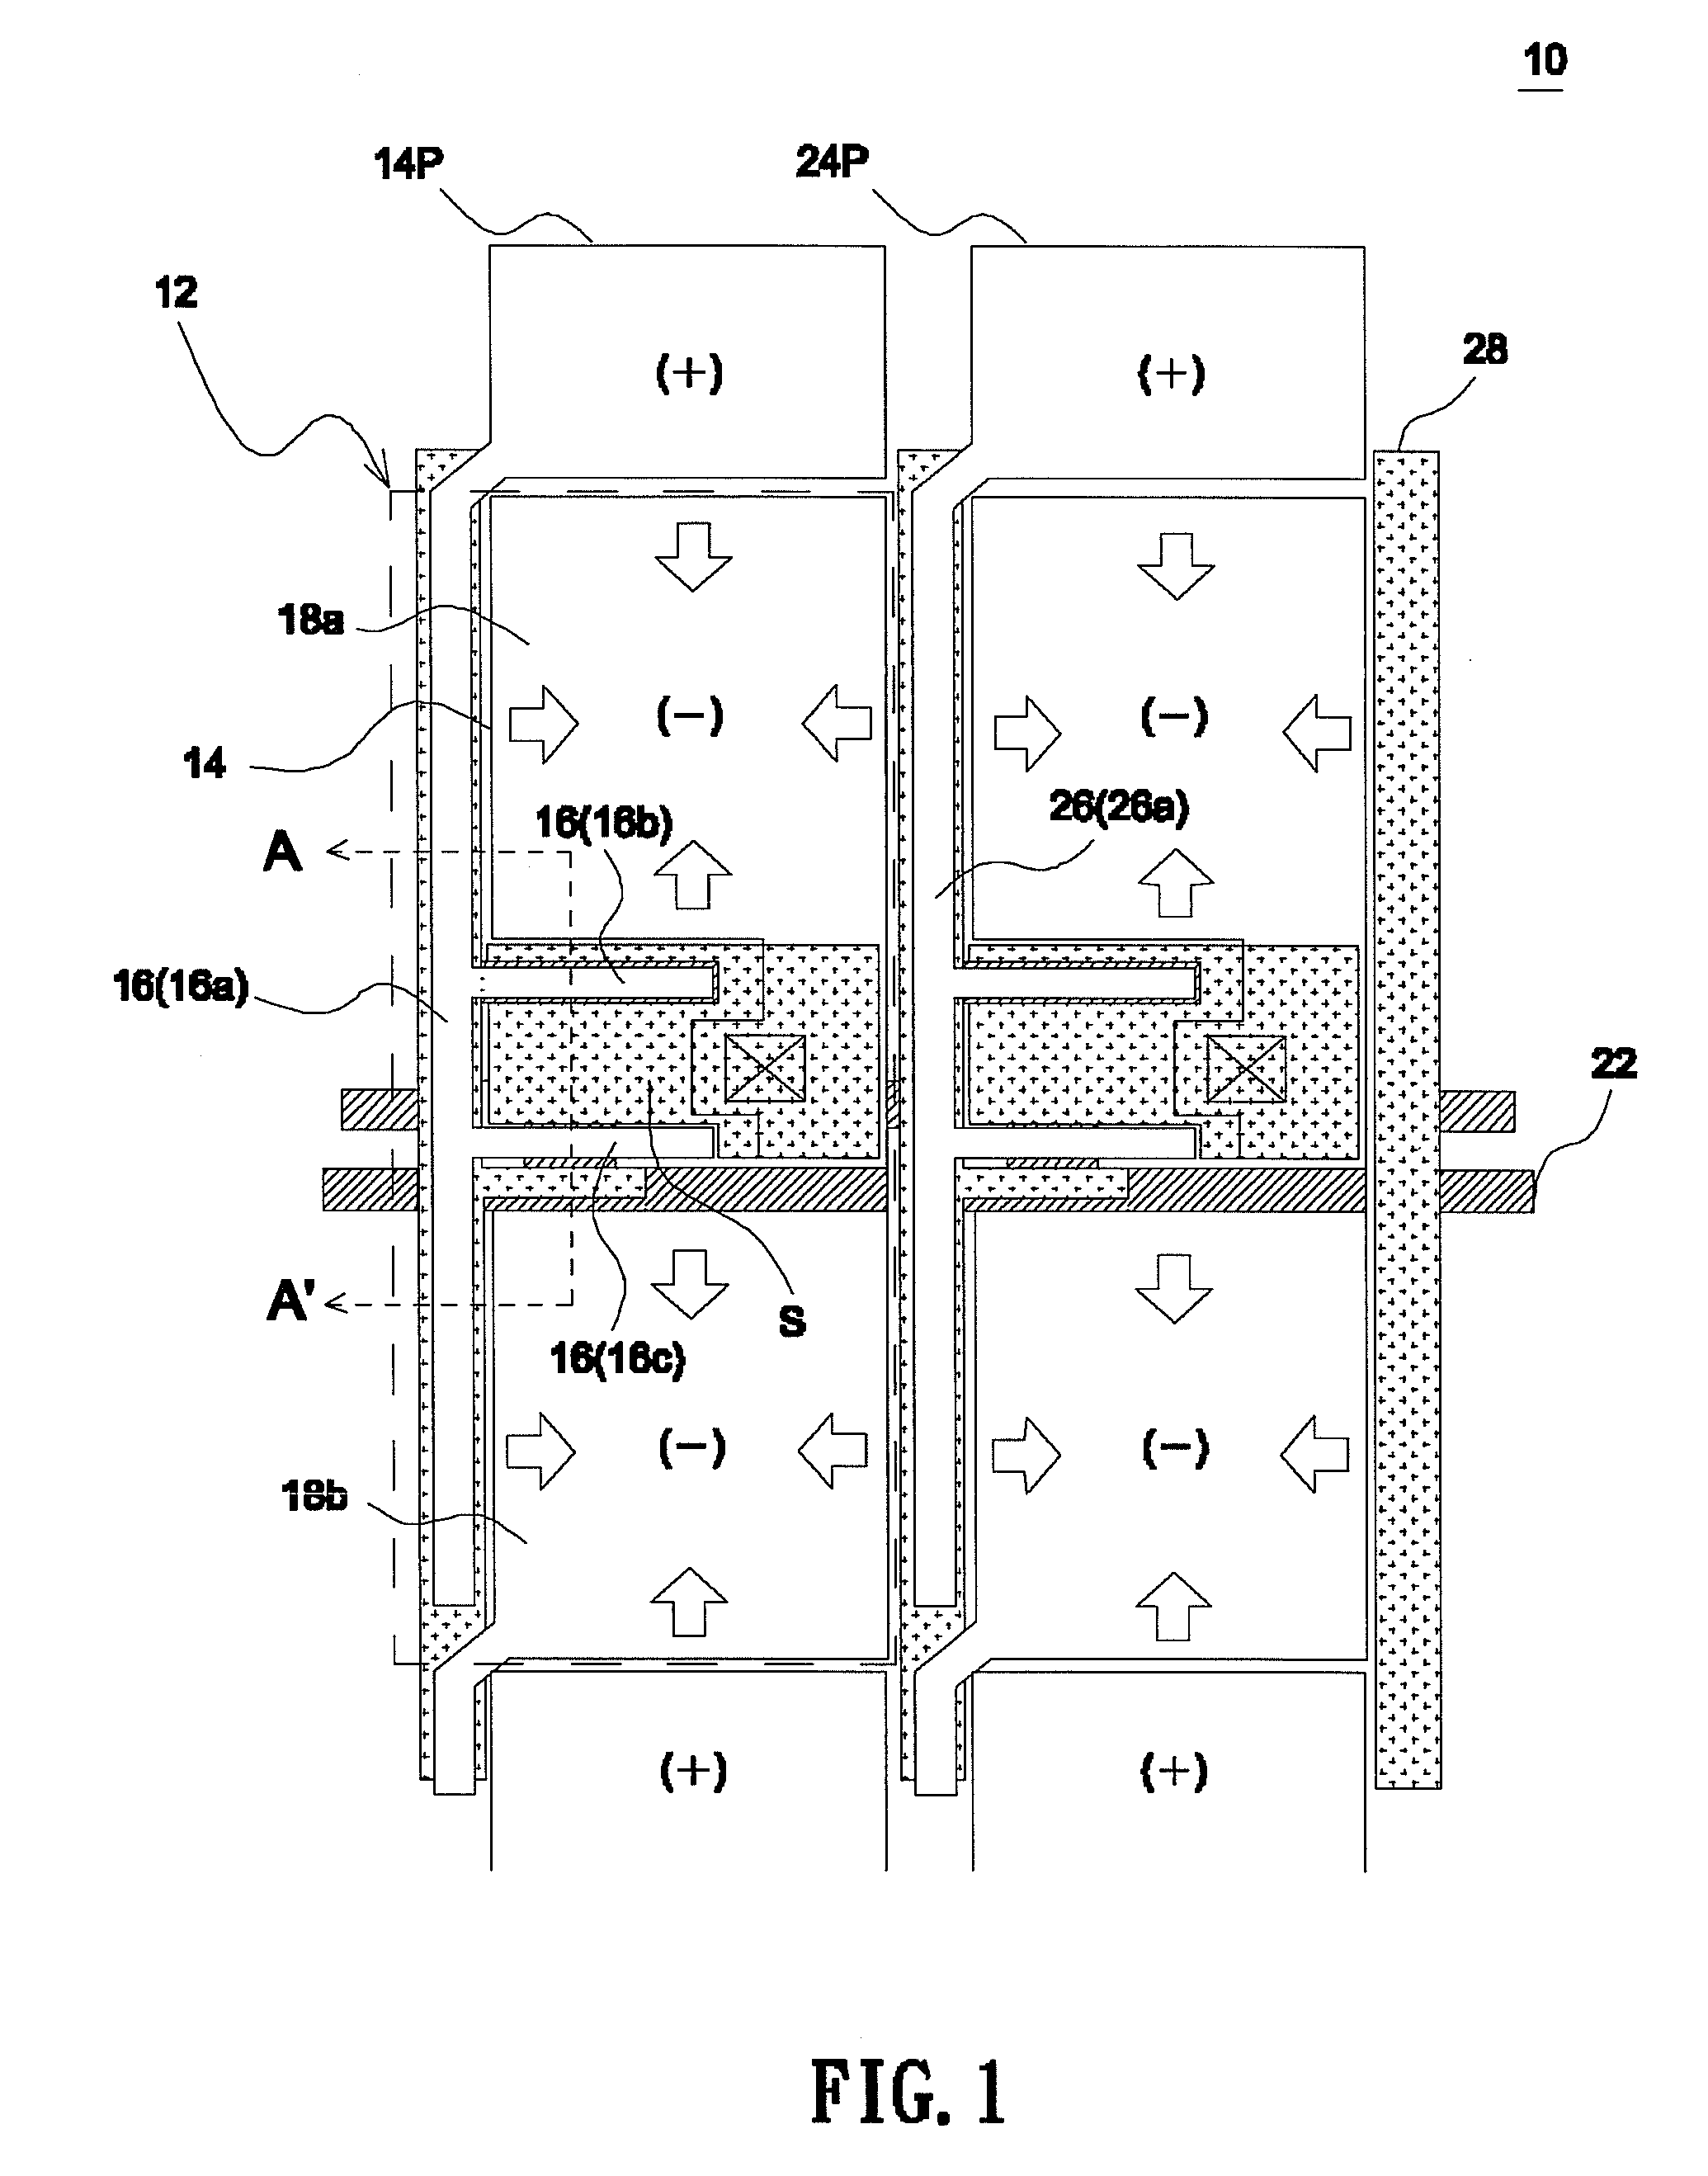 Multi-domain liquid crystal display and array substrate thereof comprising a storage capacitor having an auxiliary electrode controlled by a preceding scan line or signal line